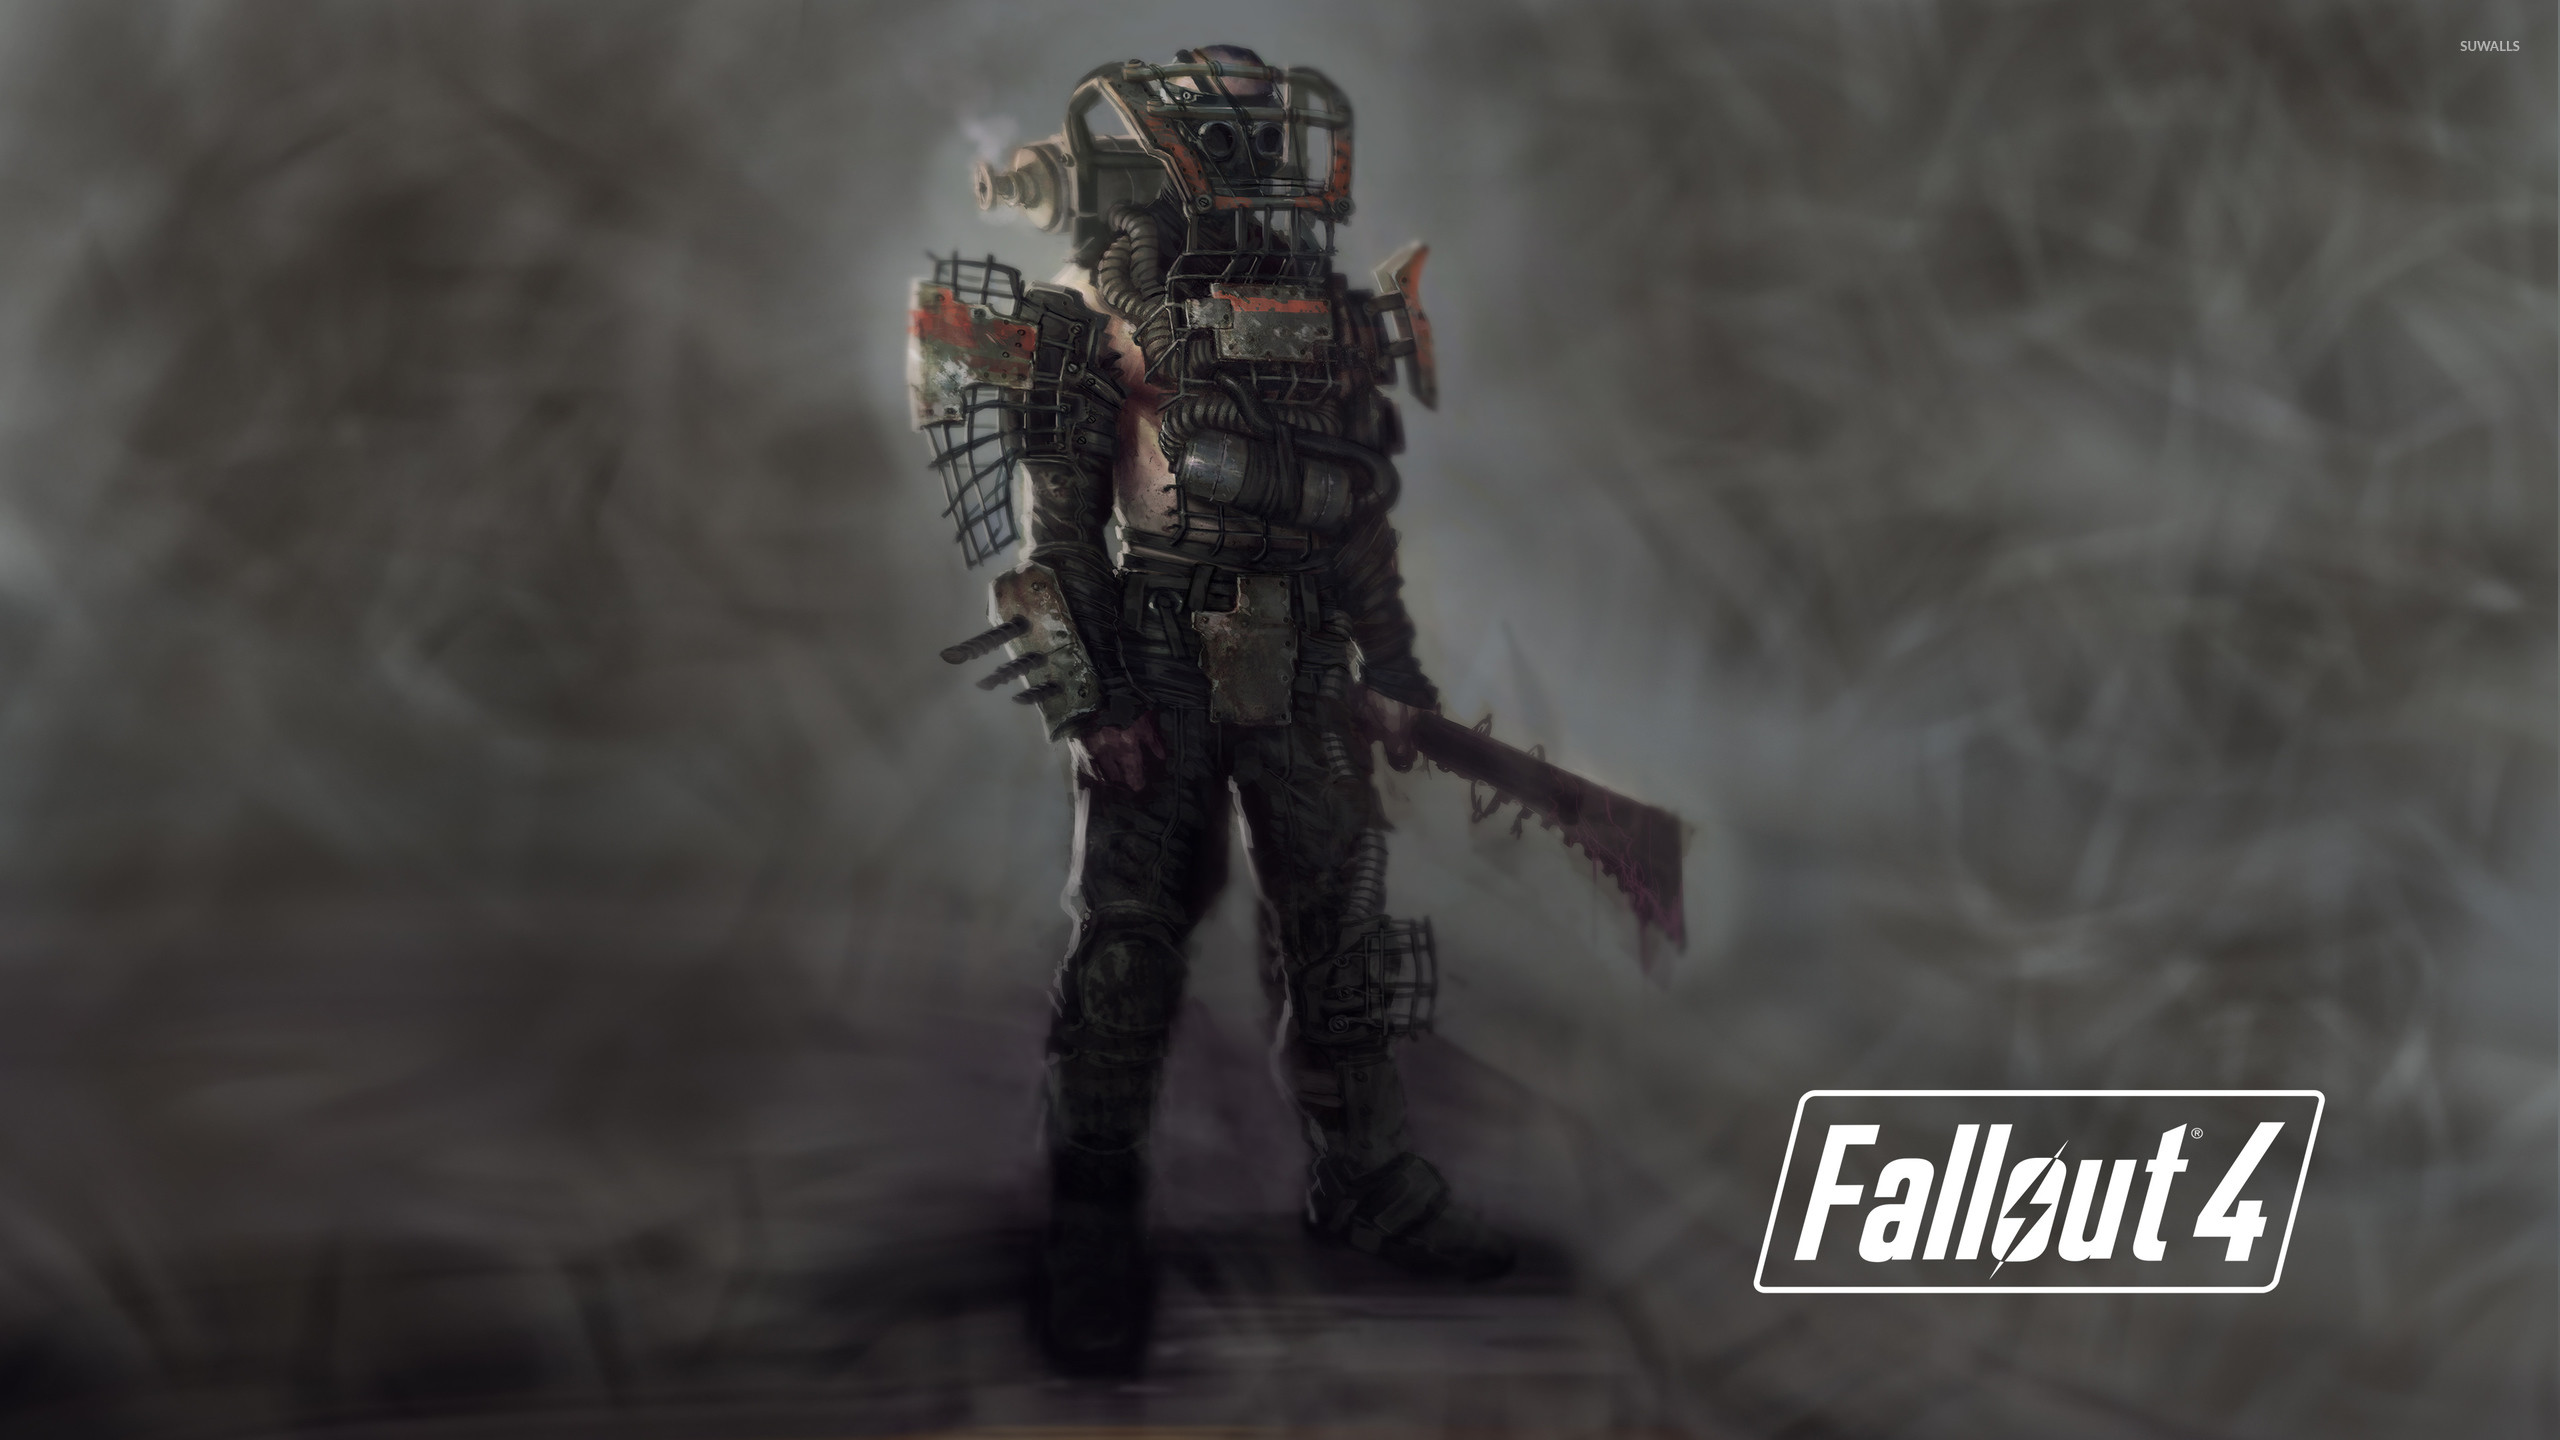 2560x1440 Raider in Fallout 4 wallpaper - Game wallpapers - #50130